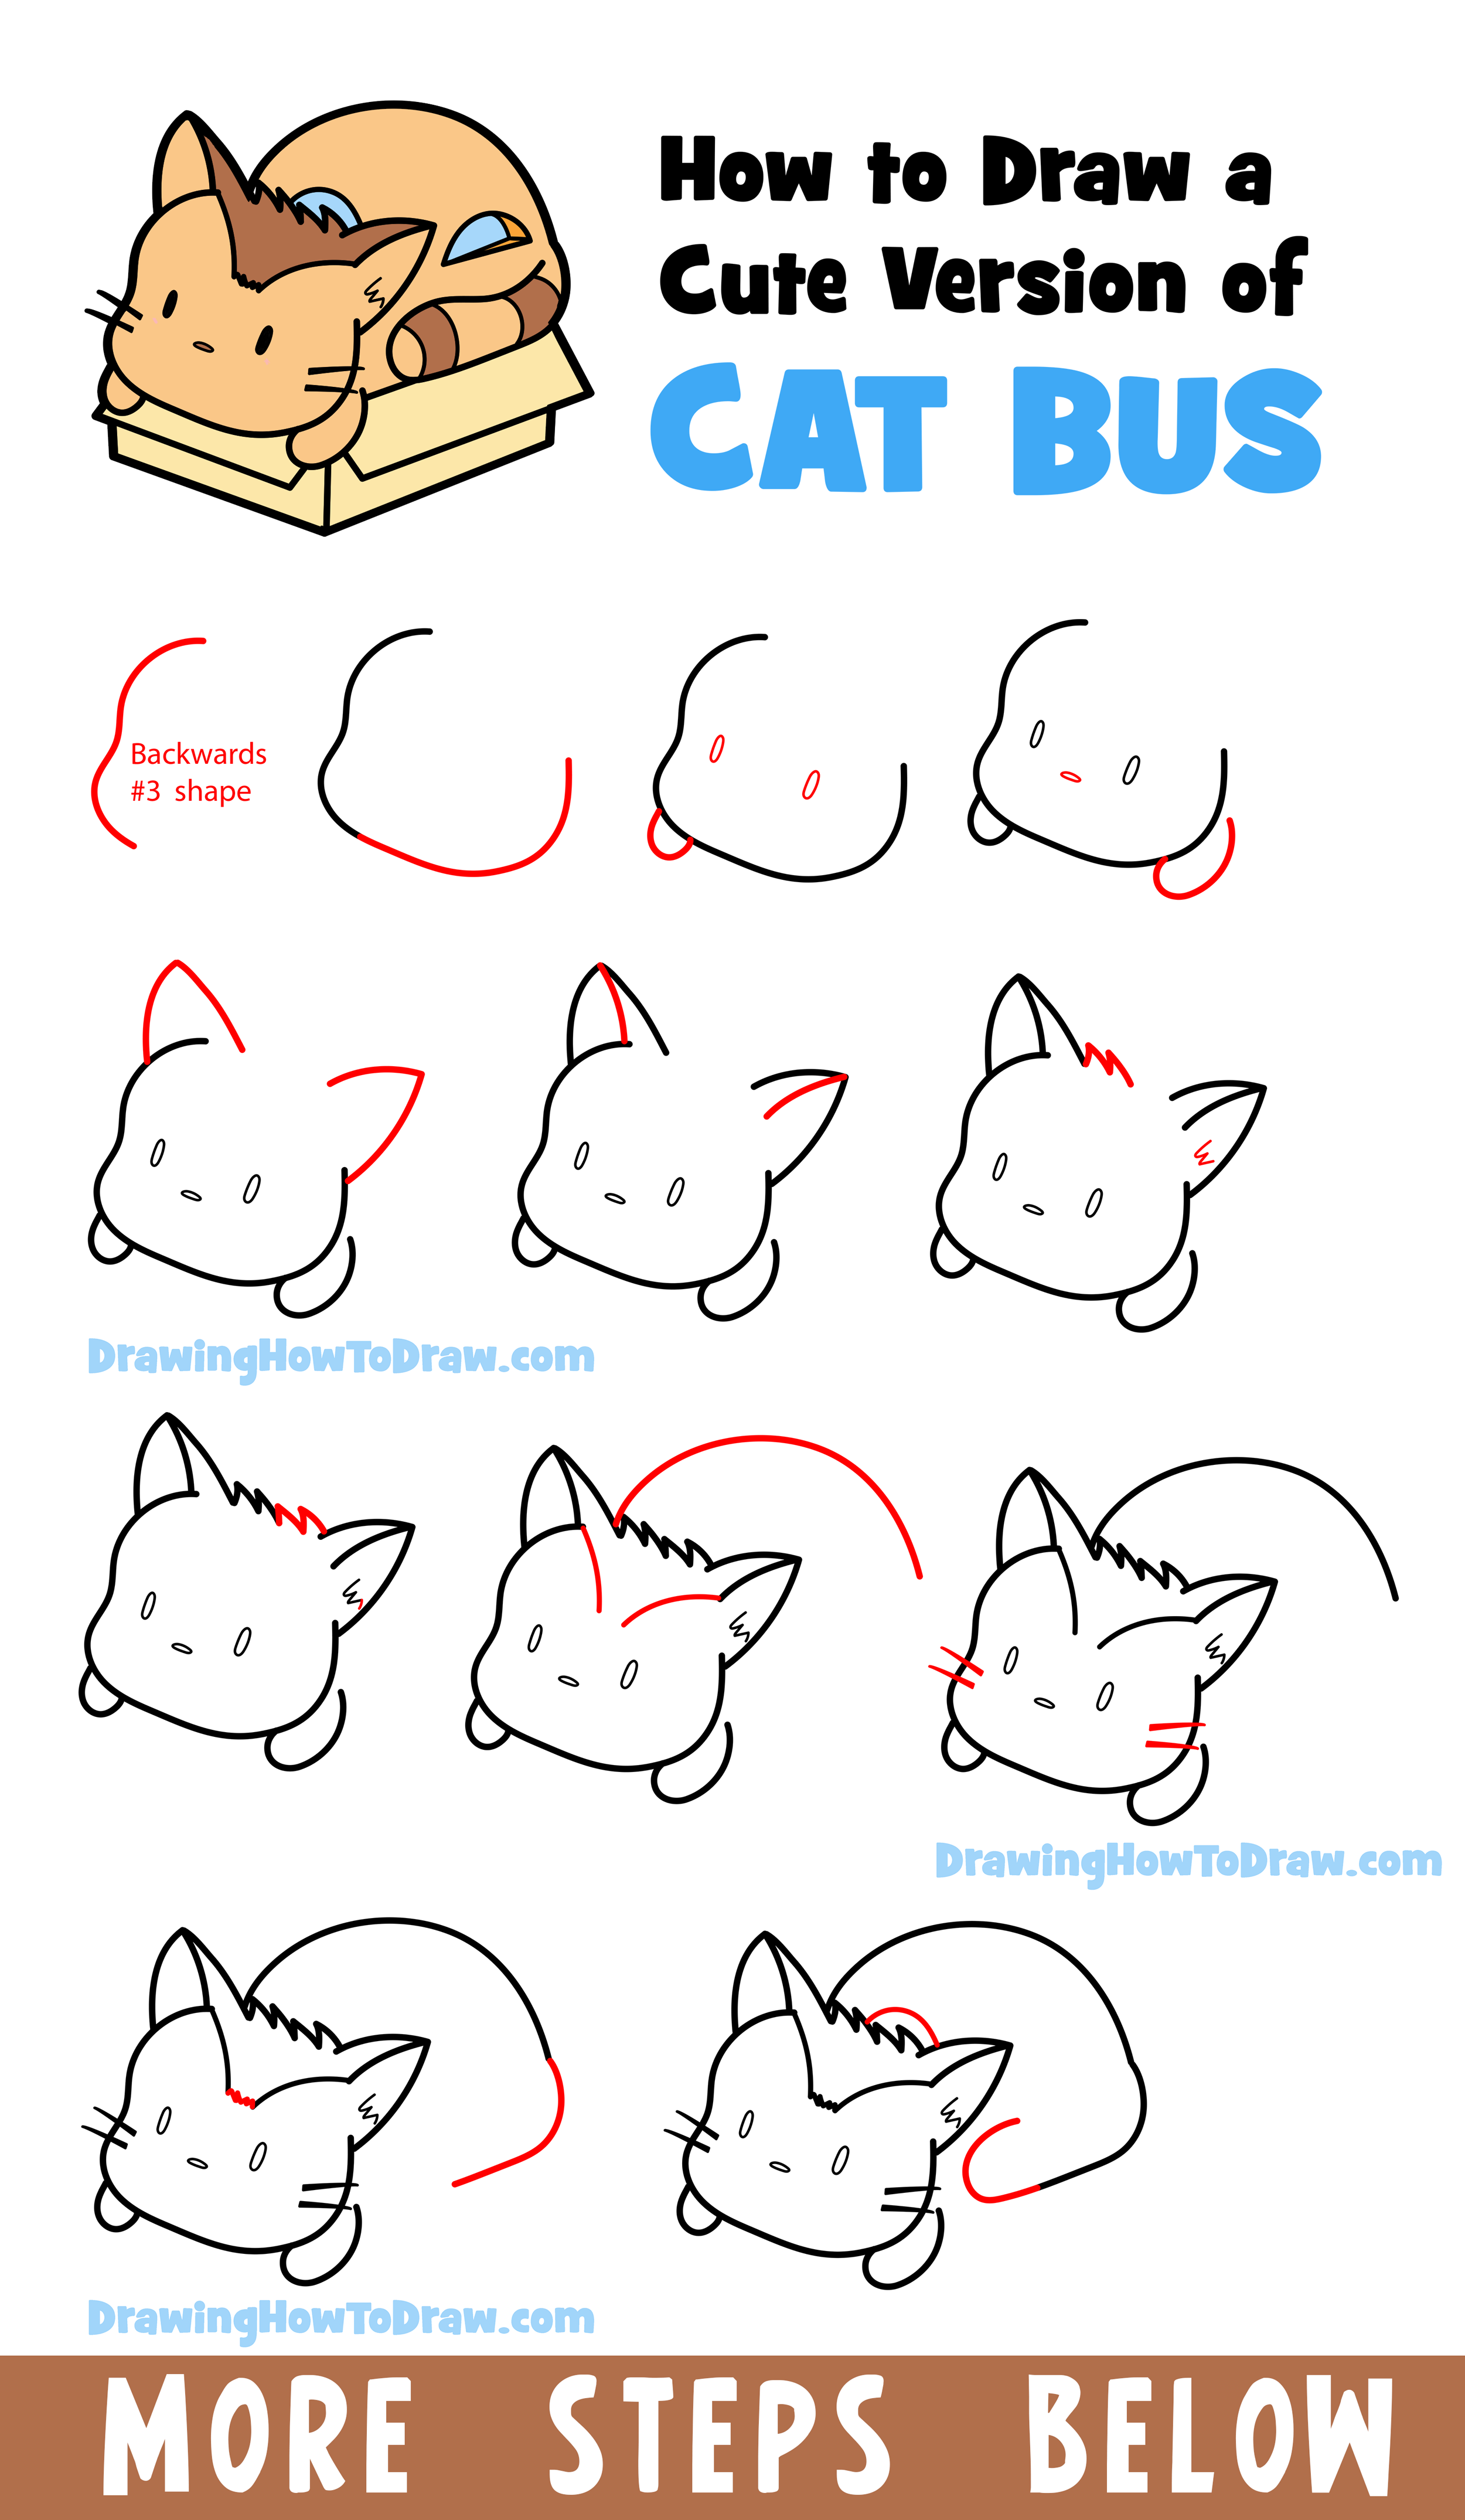 How to Draw an Anime Cat - Easy Step by Step Tutorial